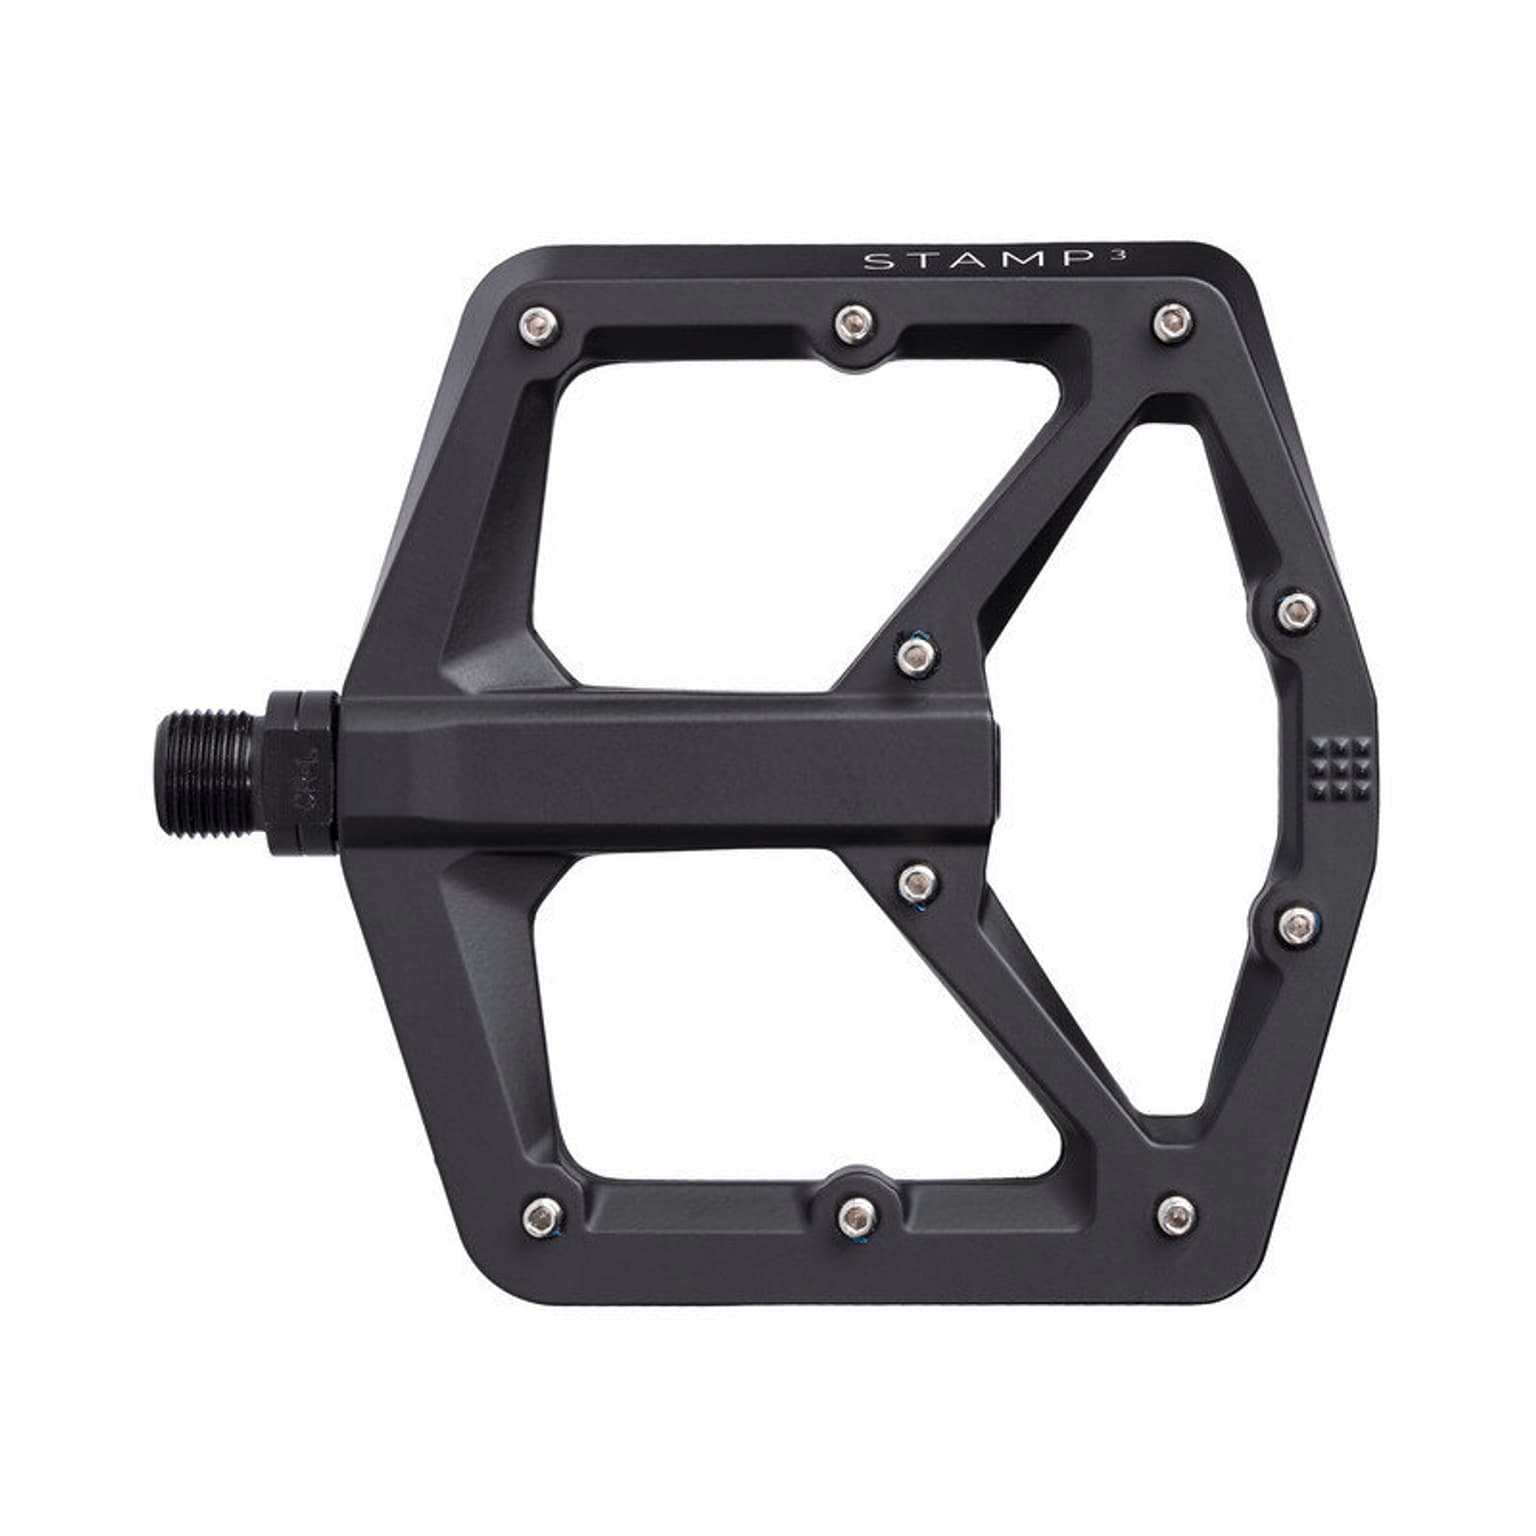 crankbrothers crankbrothers Pedal Stamp 3 large Pedale 1